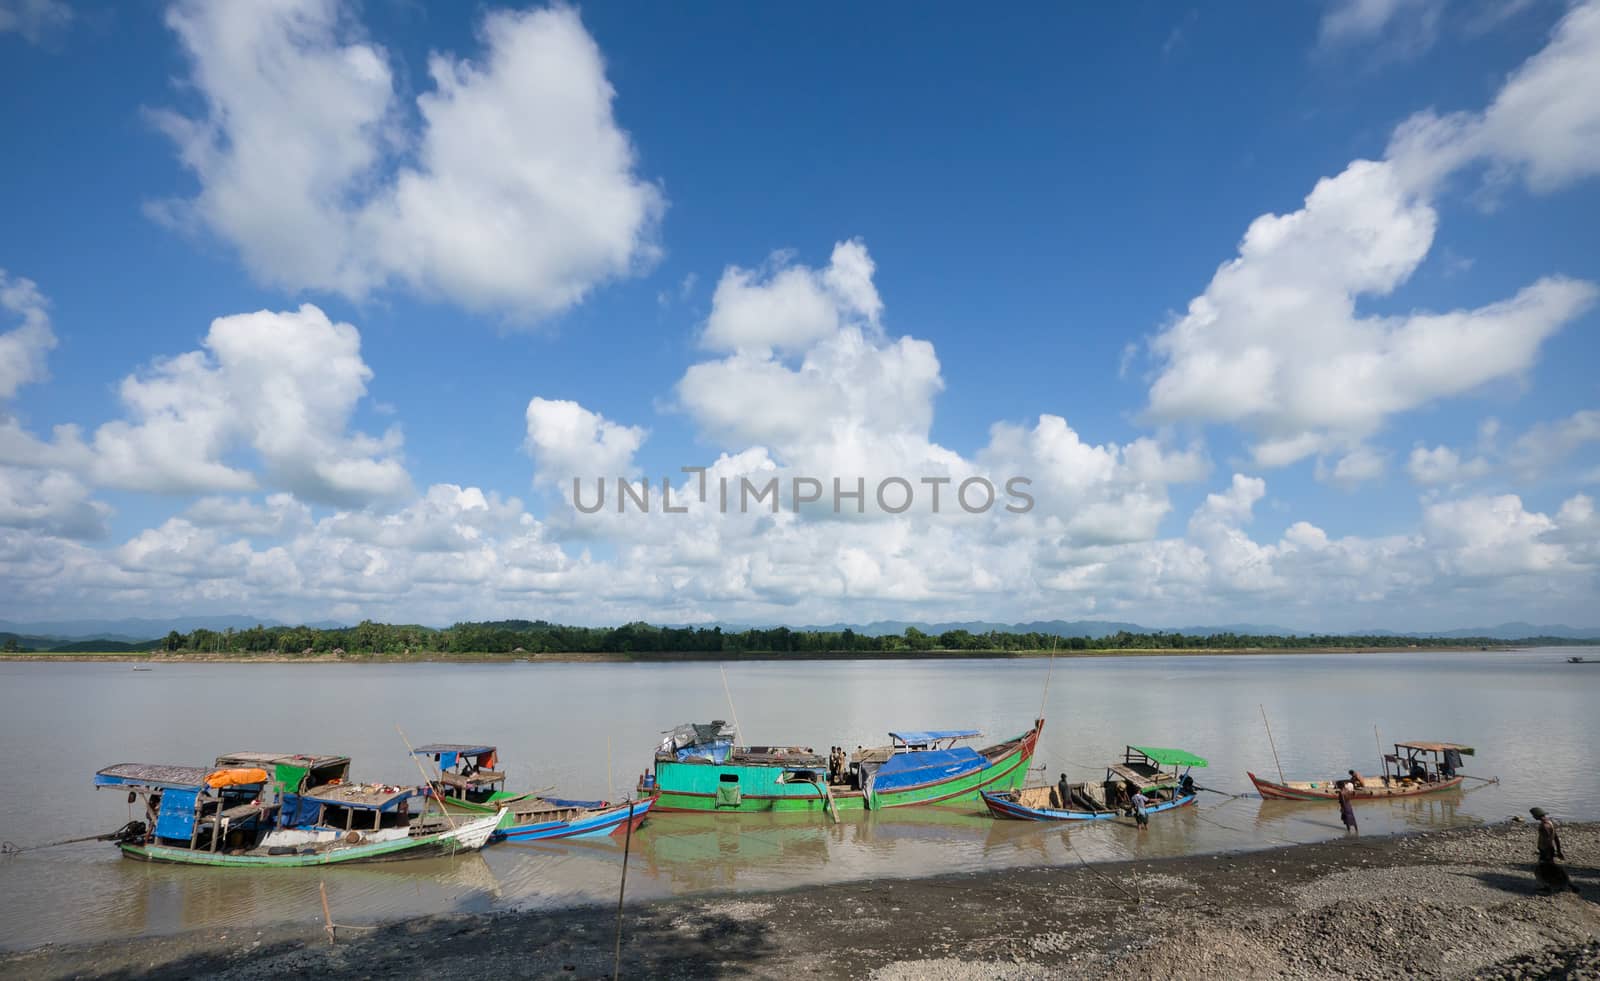 Lay Myo River, Rakhin State, Myanmar - October 17, 2014: Vessels unloading gravel and rocks for road construction that has been found further upstream.